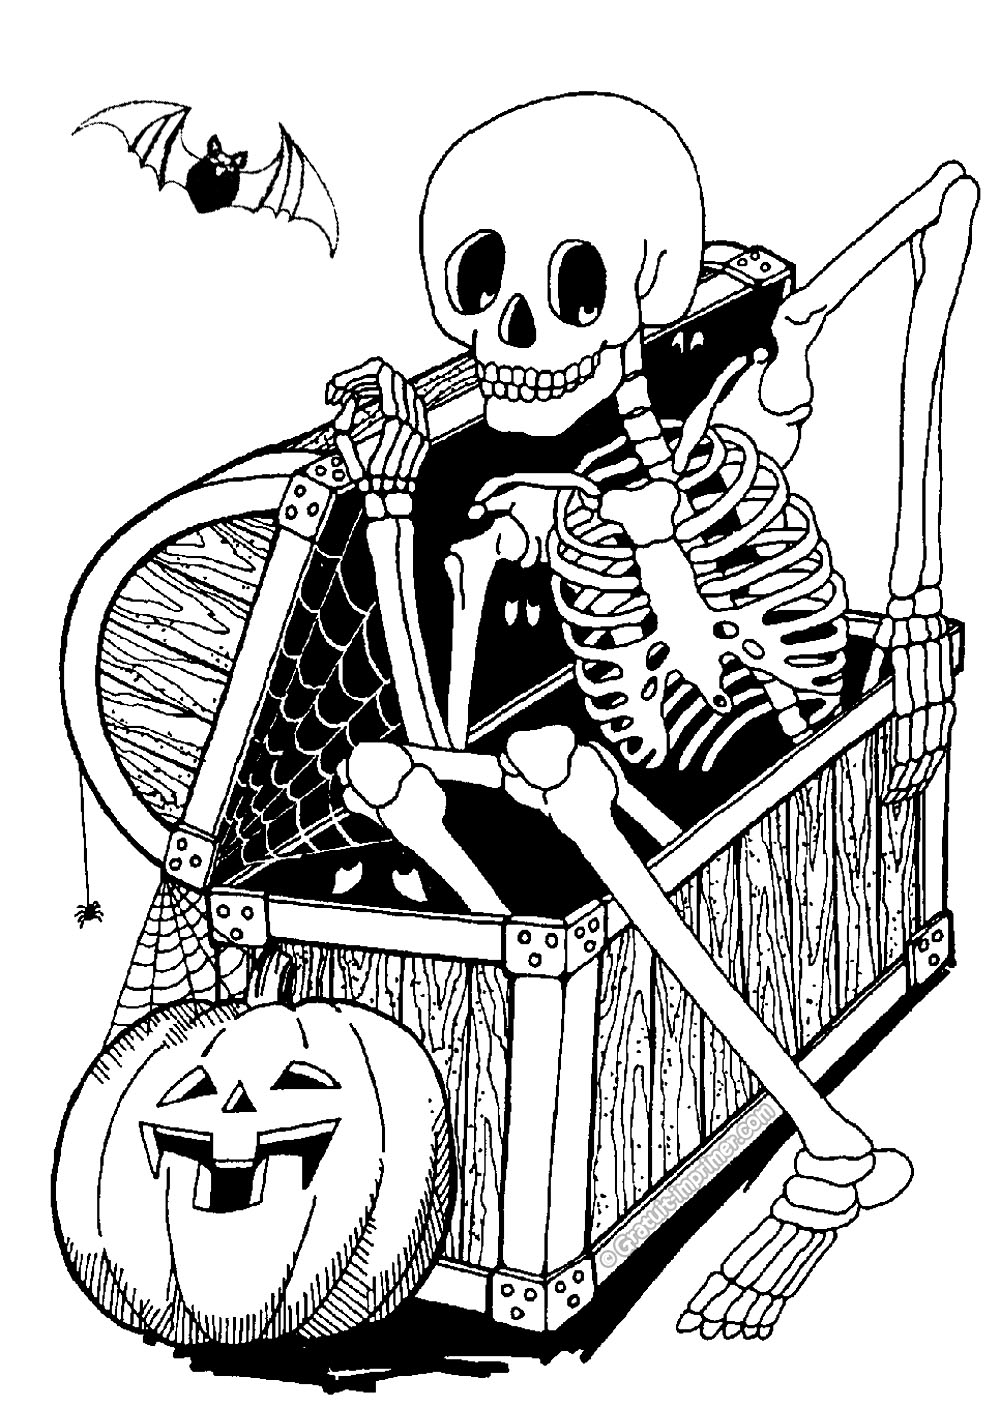 Kids Coloring Pages Halloween - Halloween Colouring Pages For Kids Messy Little Monster